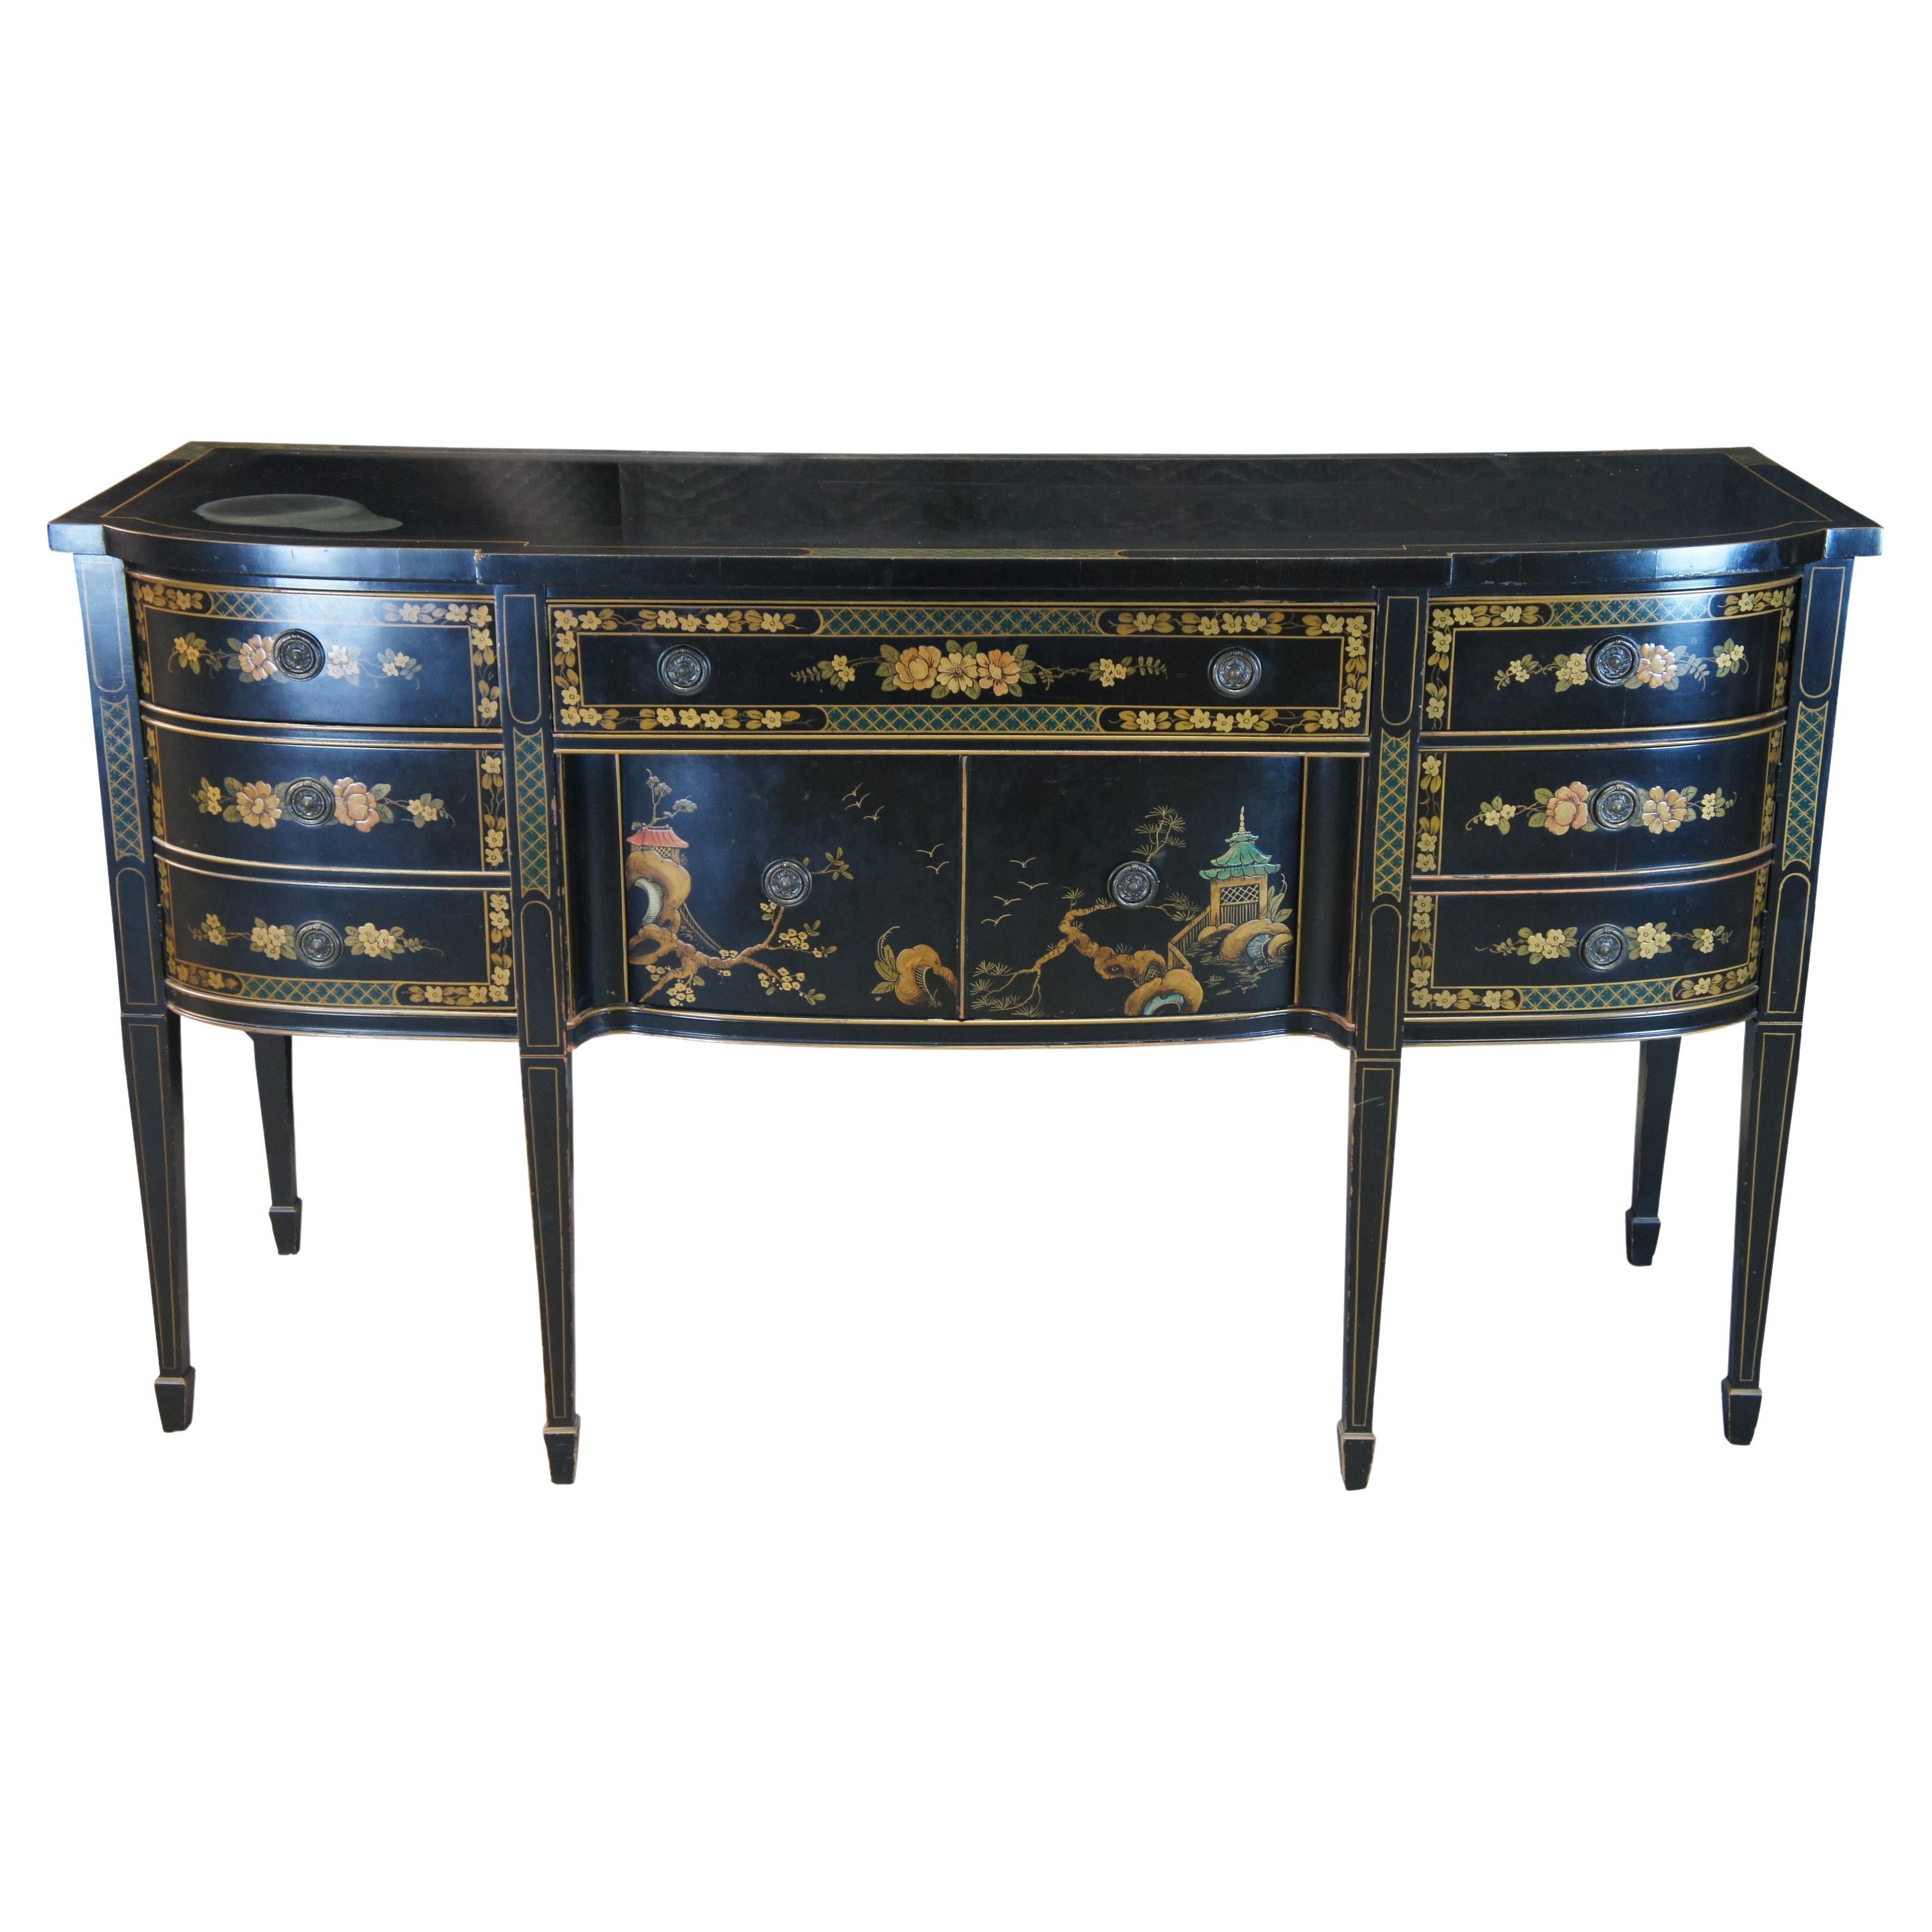 Union National Black Lacquer Chinoiserie Buffet Sideboard Server Sheraton